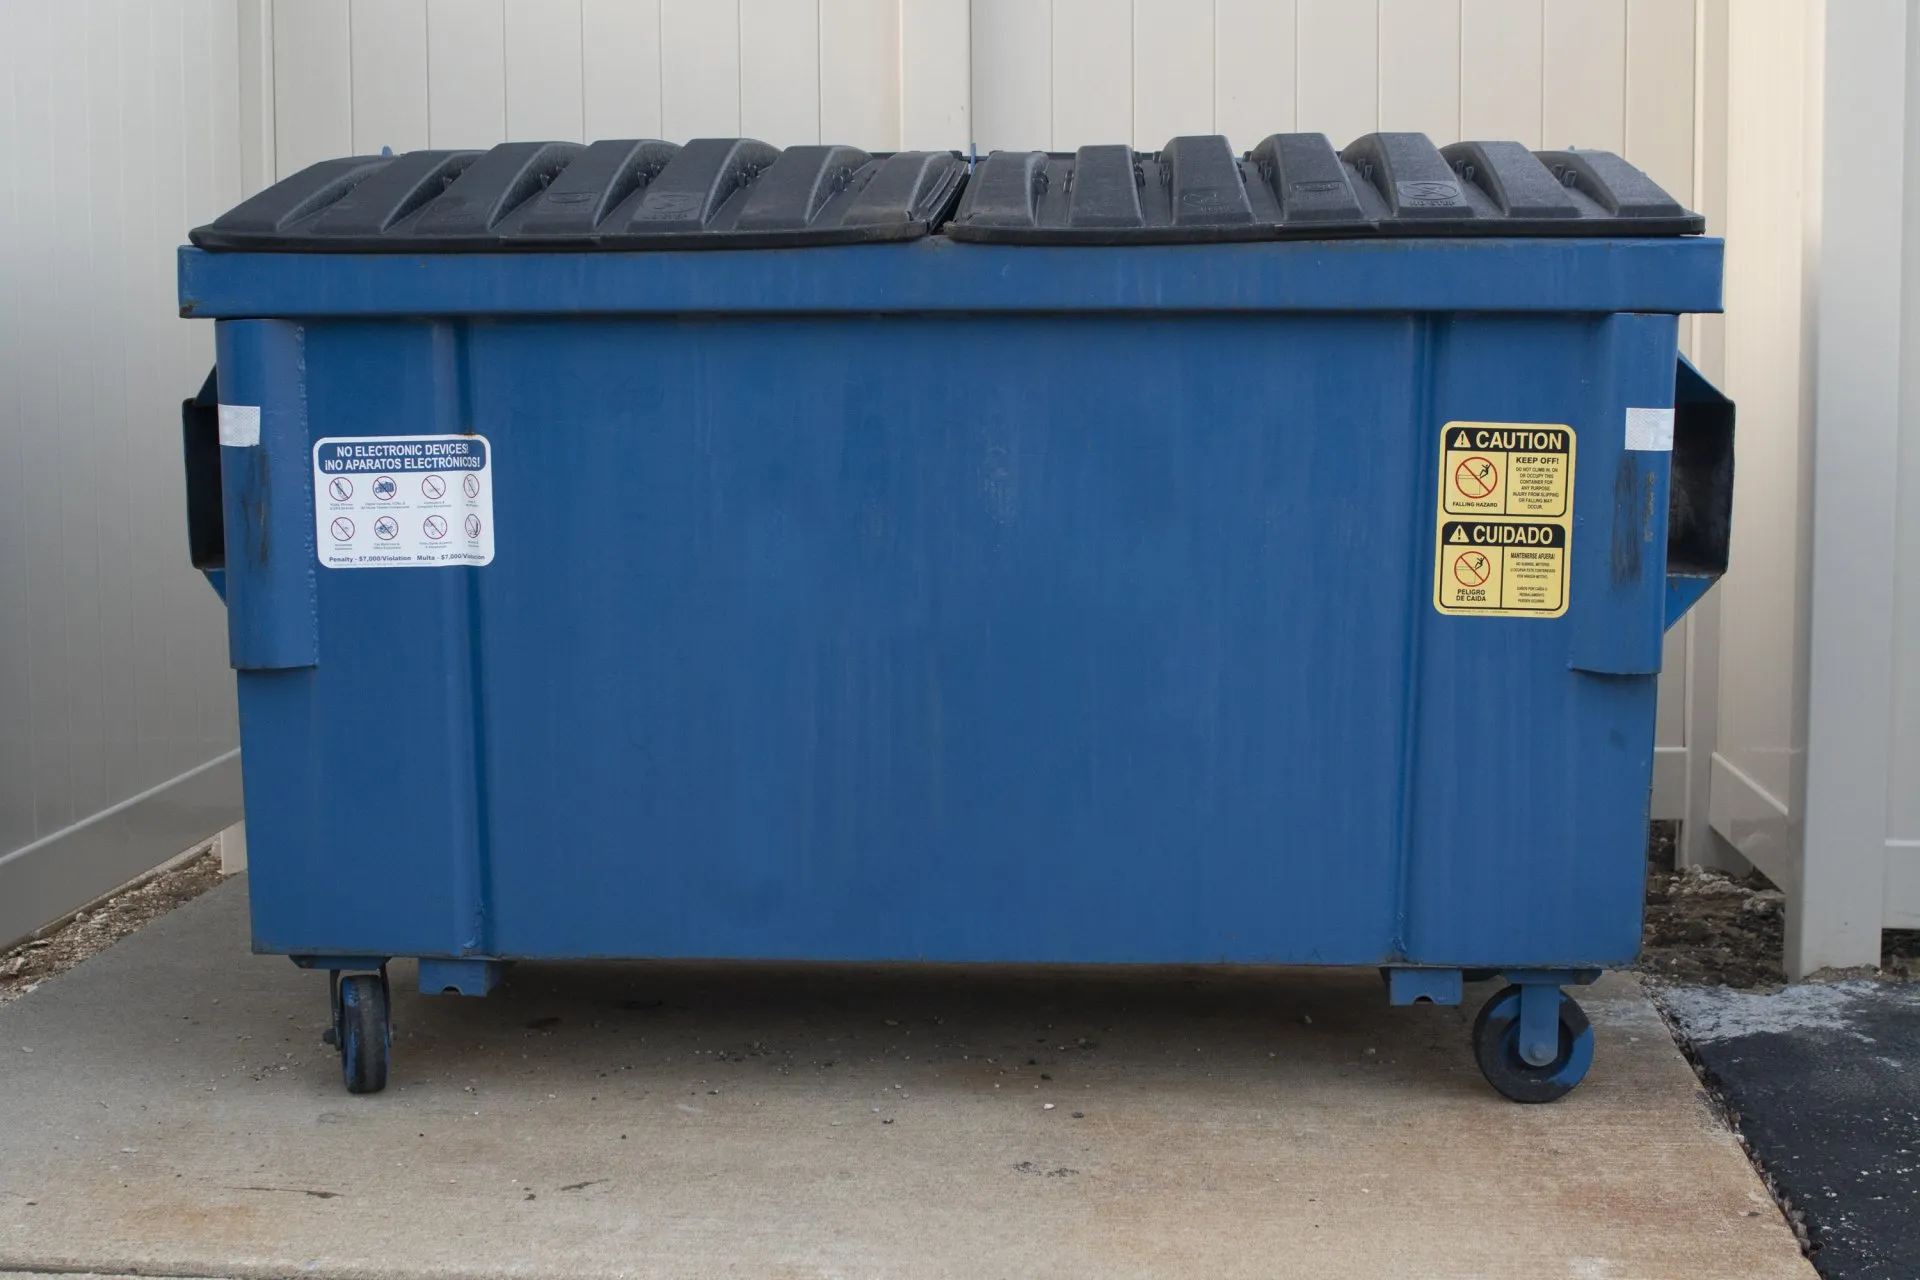 How Much Does It Cost to Rent a Dumpster - Dumpster Rental Springfield MA